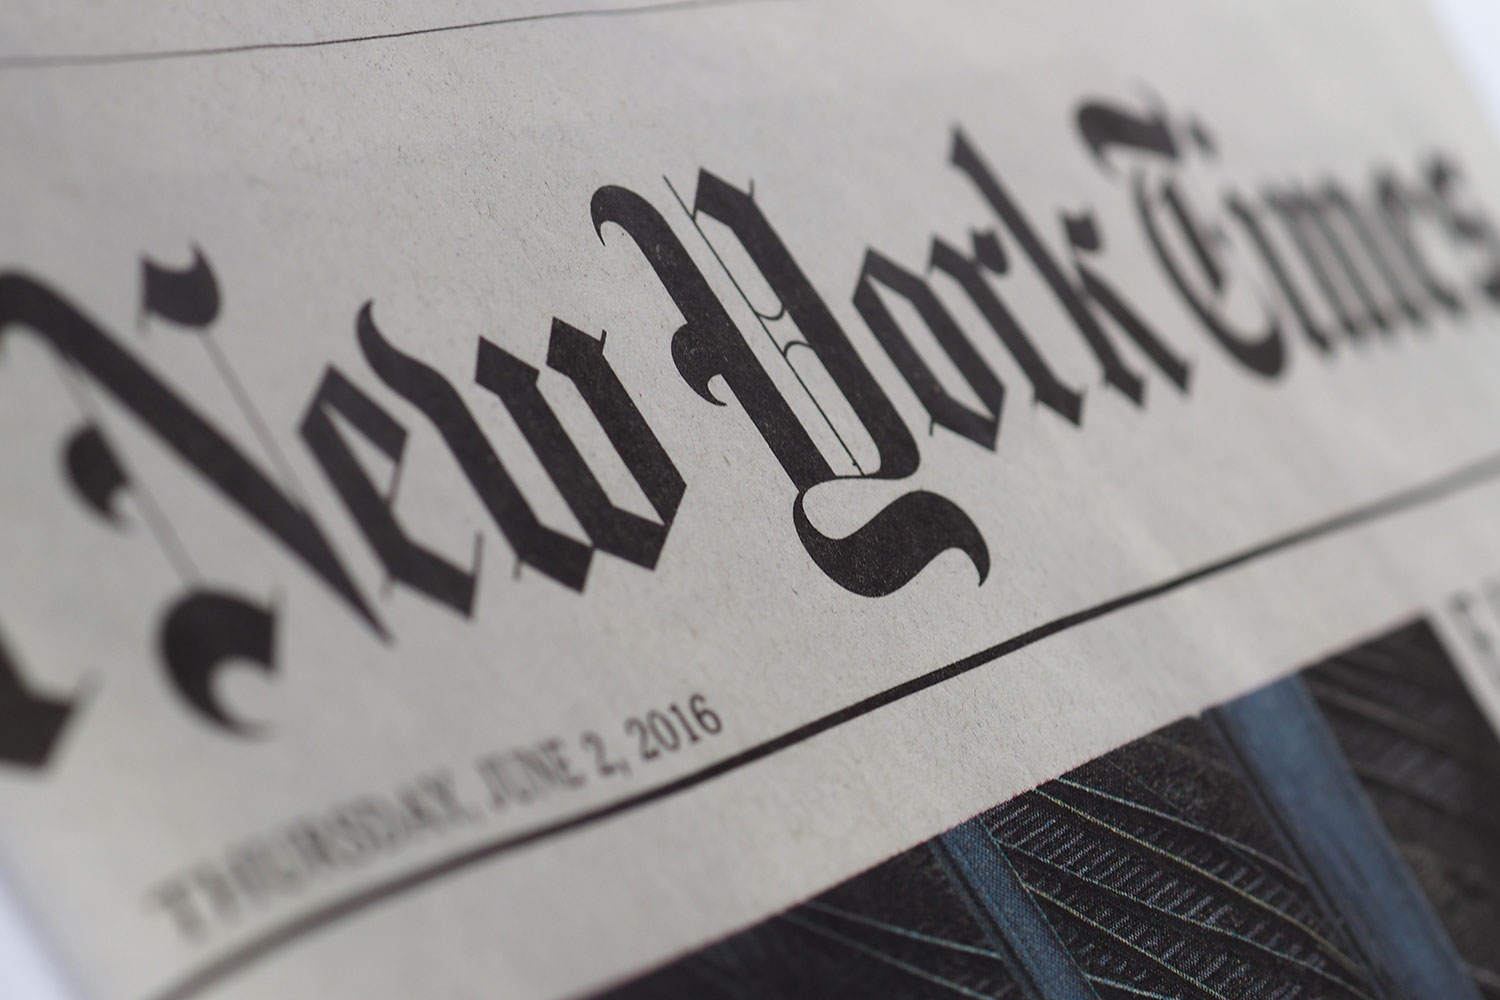 Close up of the front page of The New York Times focusing on the newspaper's logo